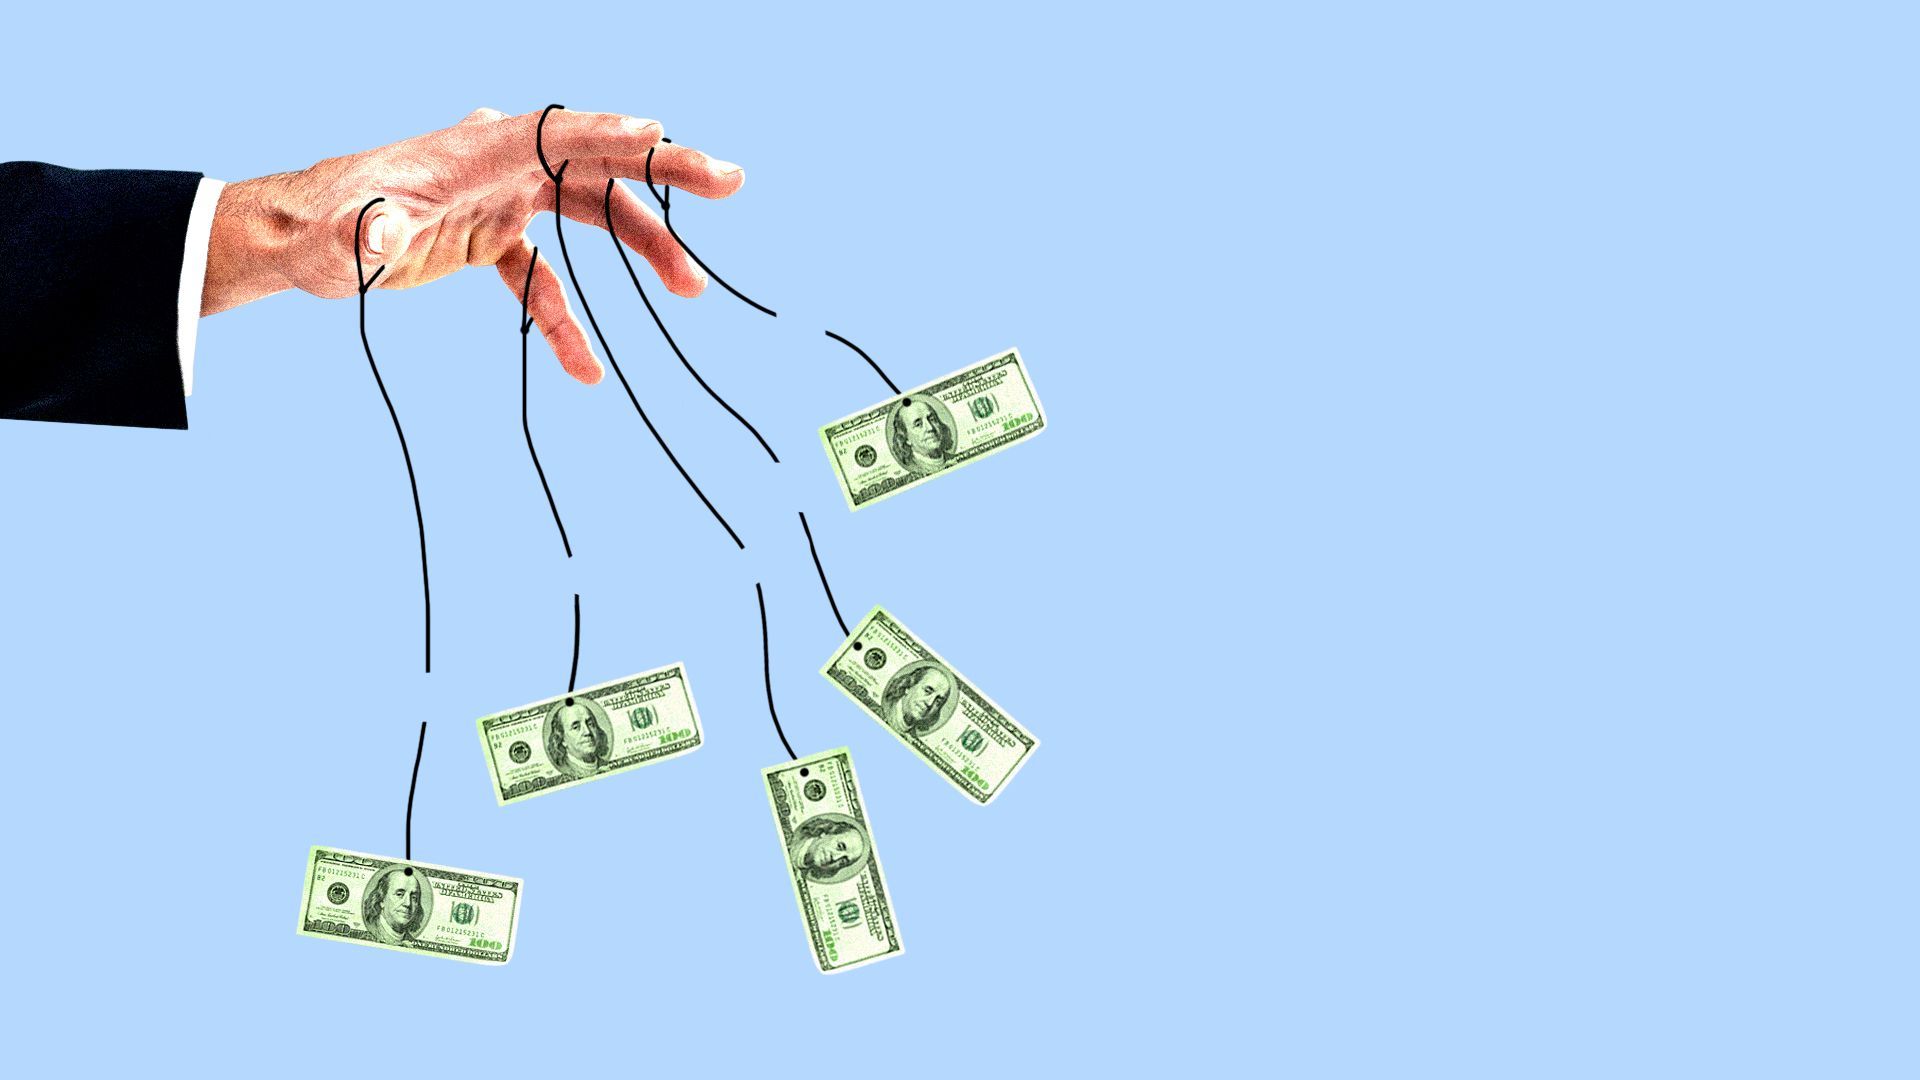 dollar bills being dangled from a man's fingers on cut strings